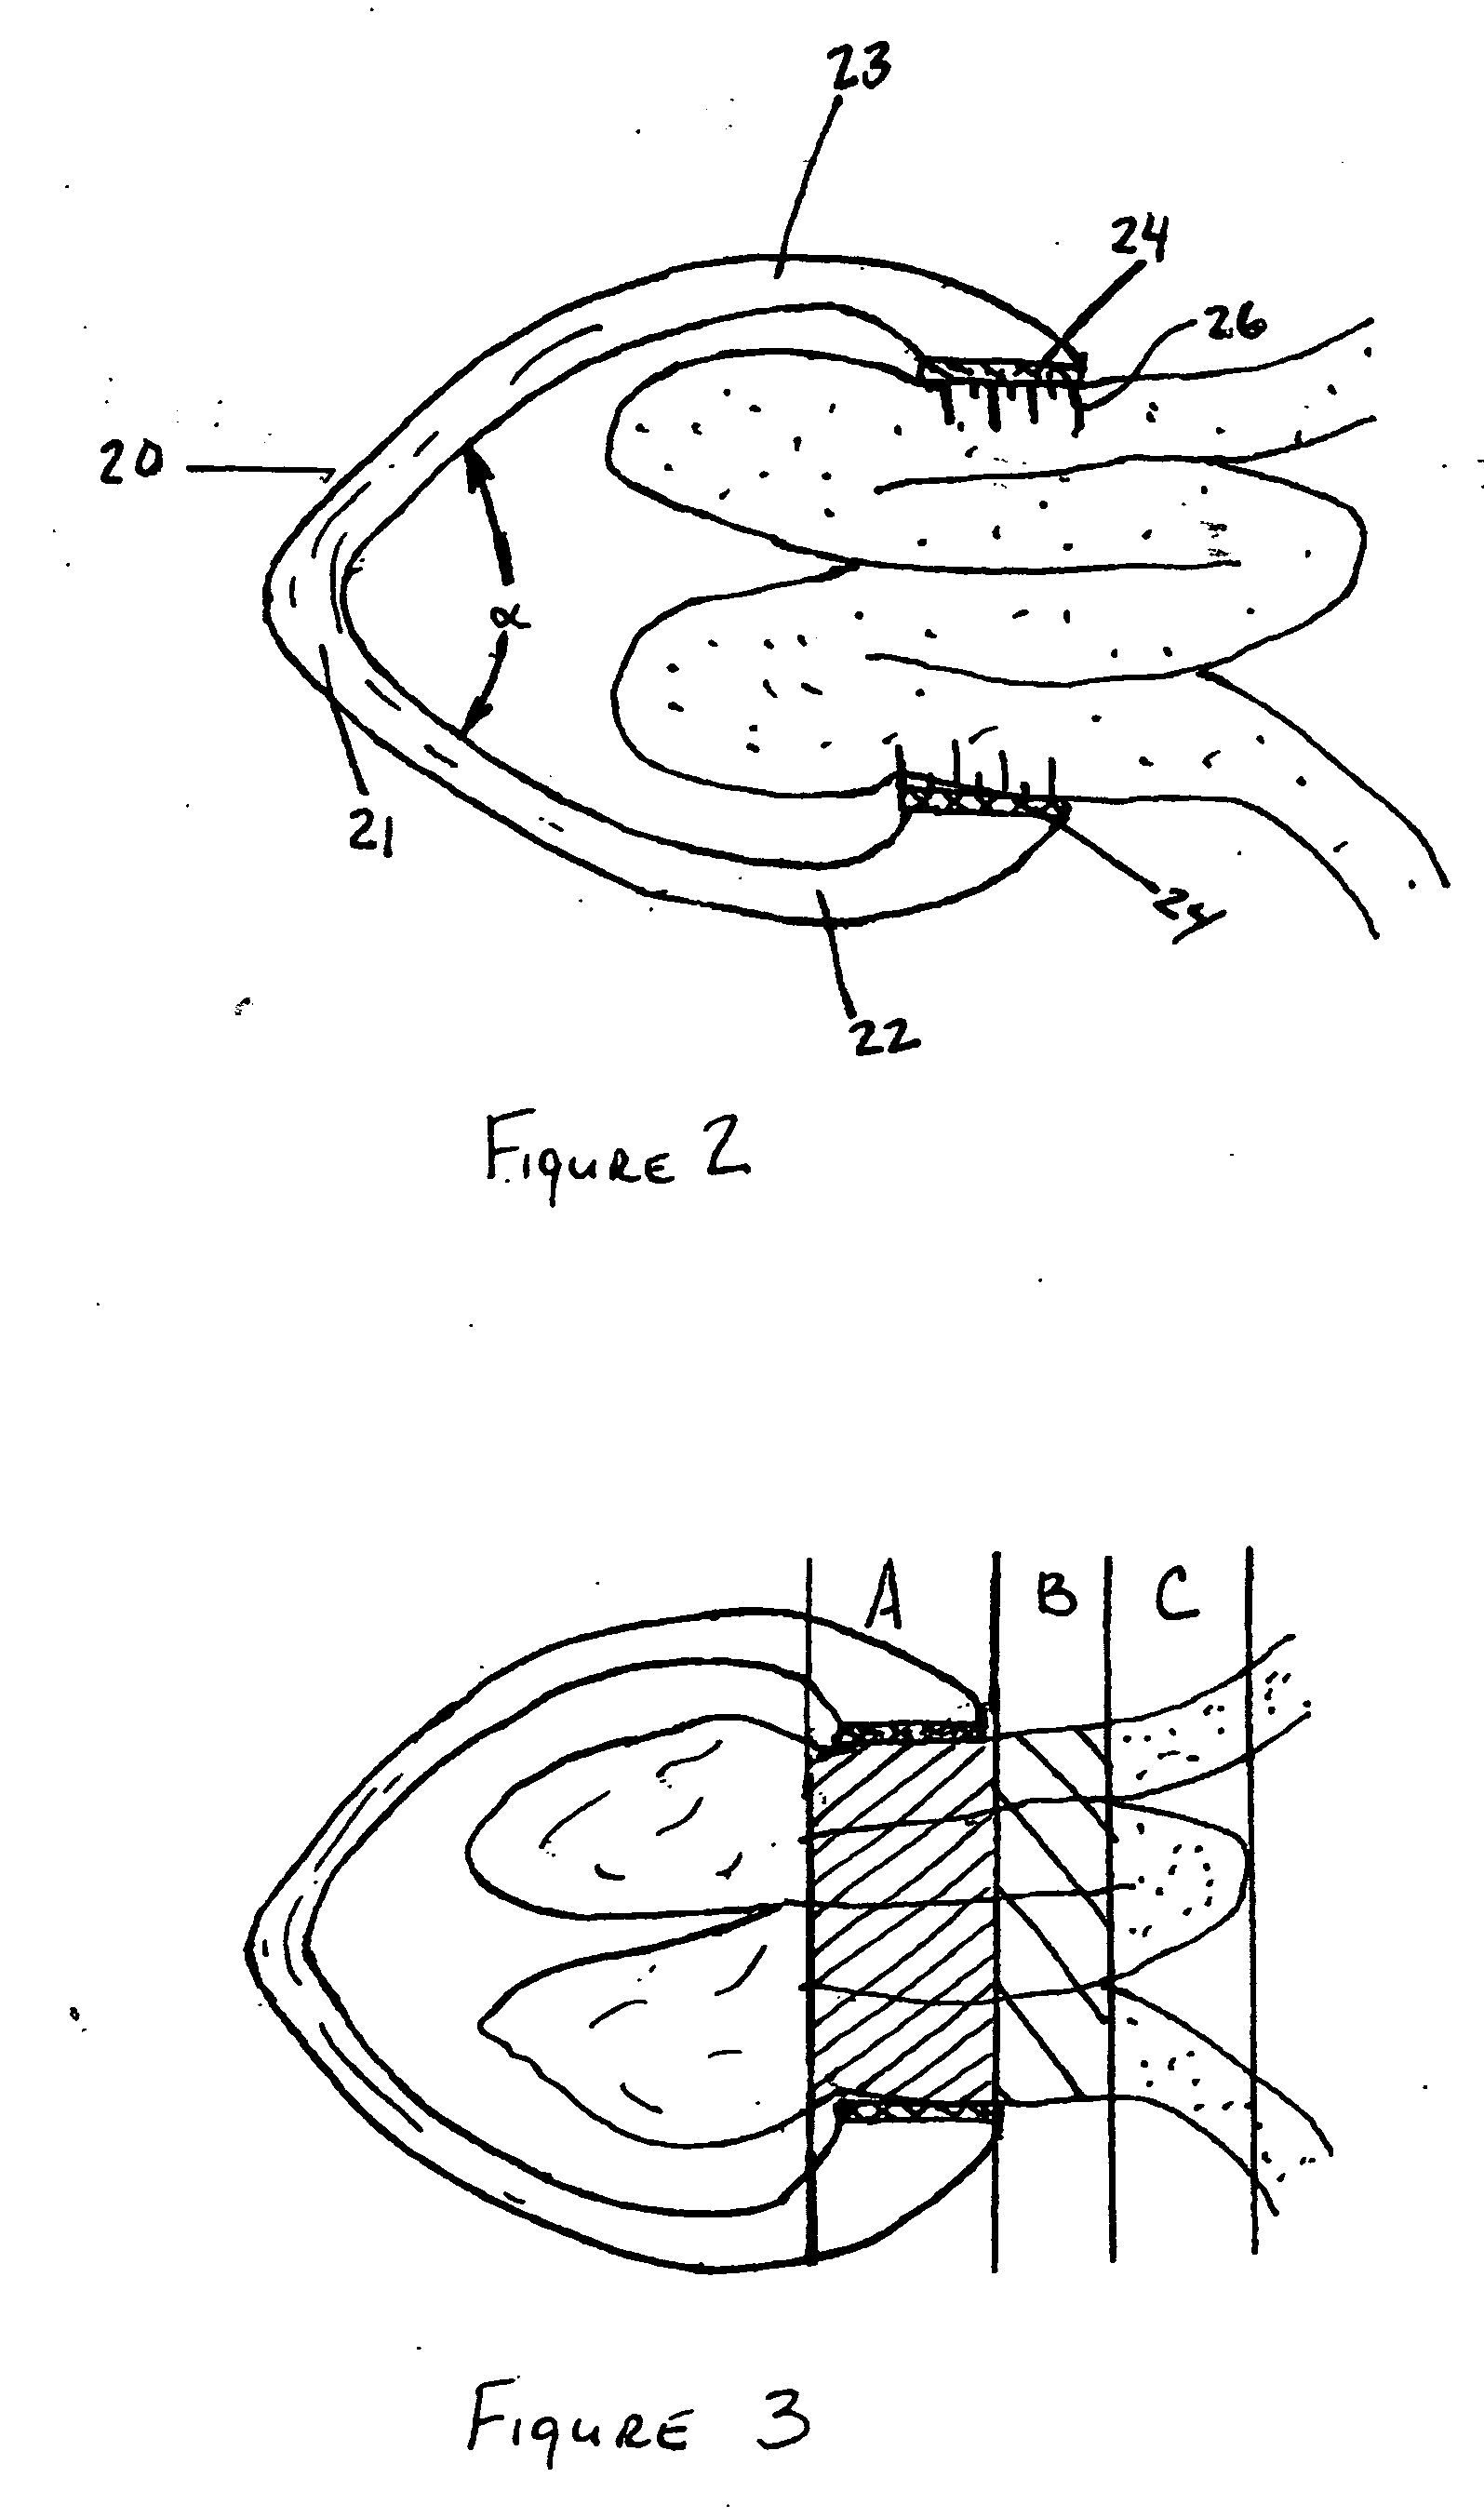 Methods and apparatus for excising tissue and creating wall-to-wall adhesions from within an organ